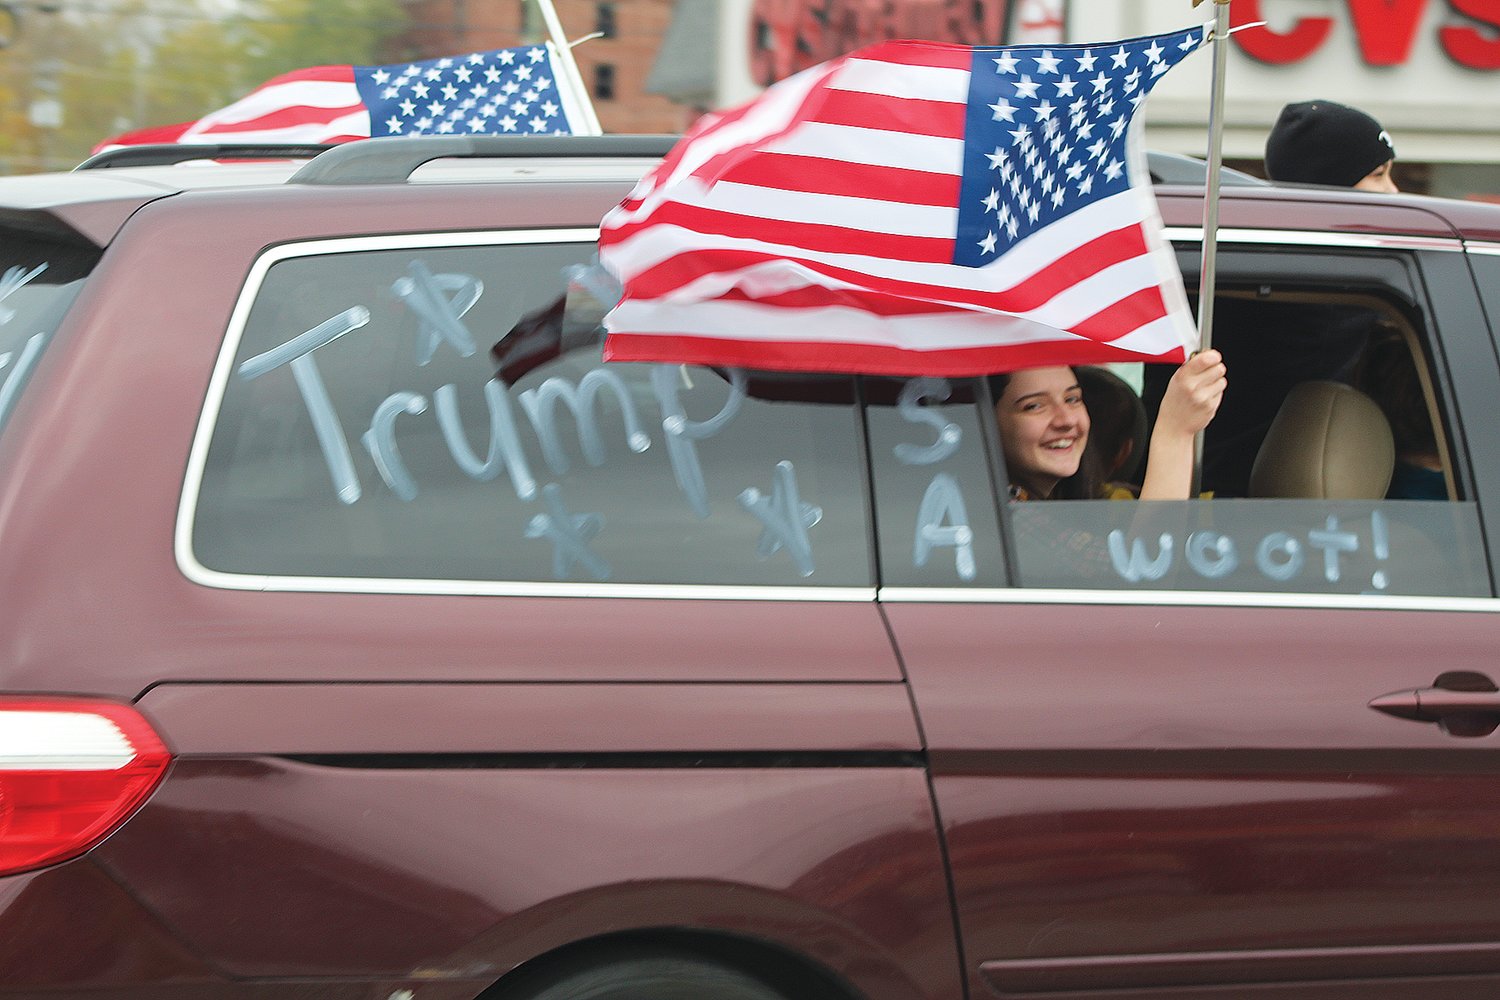 Cars and trucks adorned in patriotic colors, decorations and flags made their way through Crawfordsville on Sunday as part of an organized Trump Train event. Supporters of President Donald Trump honked their horns and chanted “four more years.”